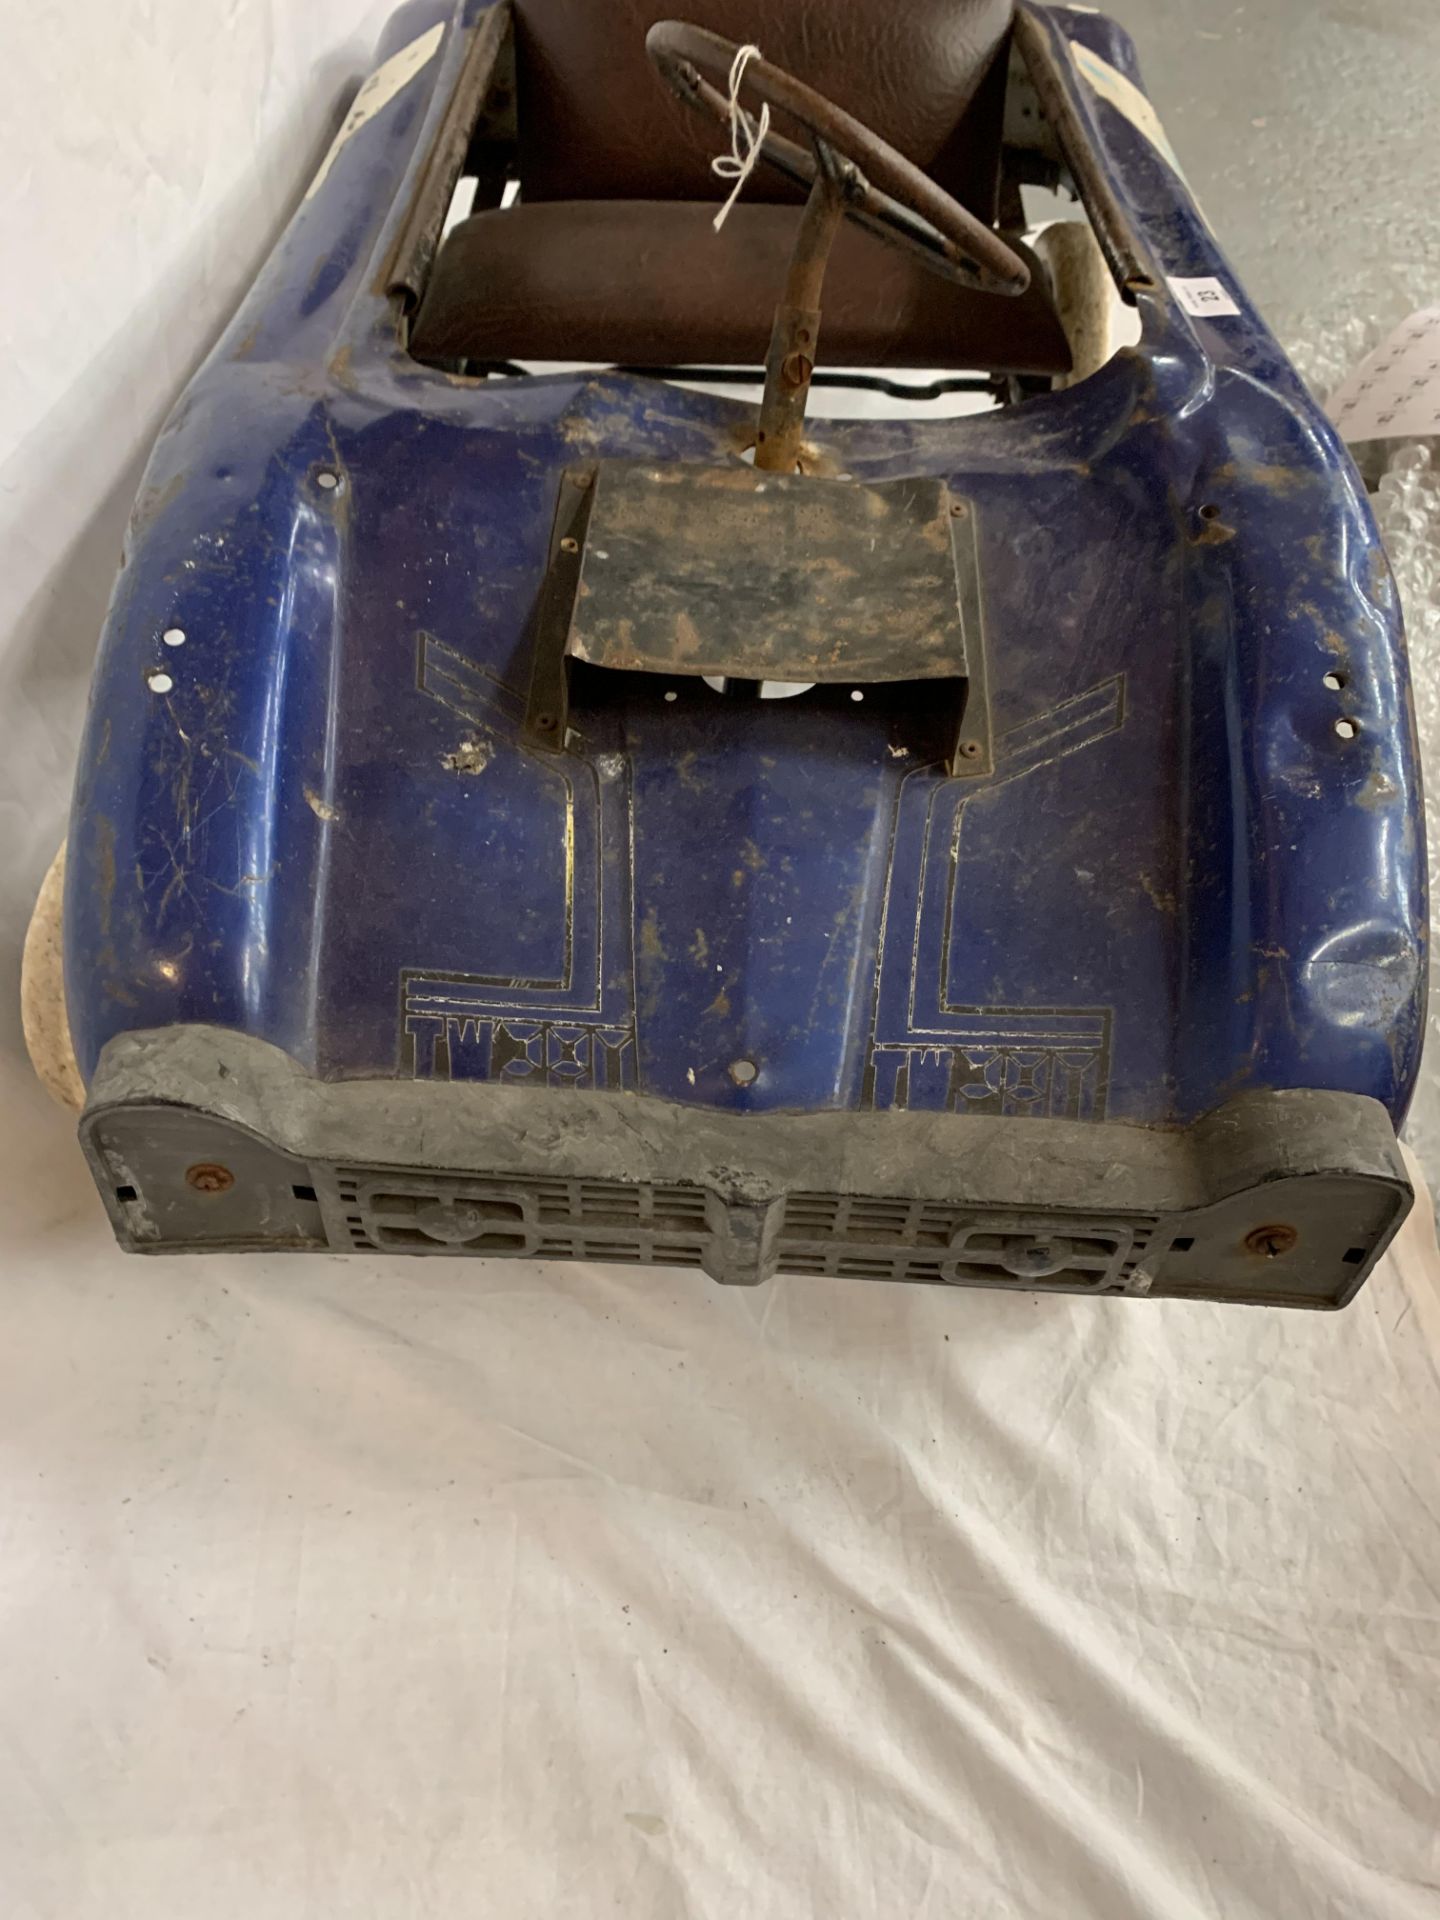 A VINTAGE TORING WOEI CHILDRENS PEDAL RACING CAR IN BLUE - Image 2 of 5